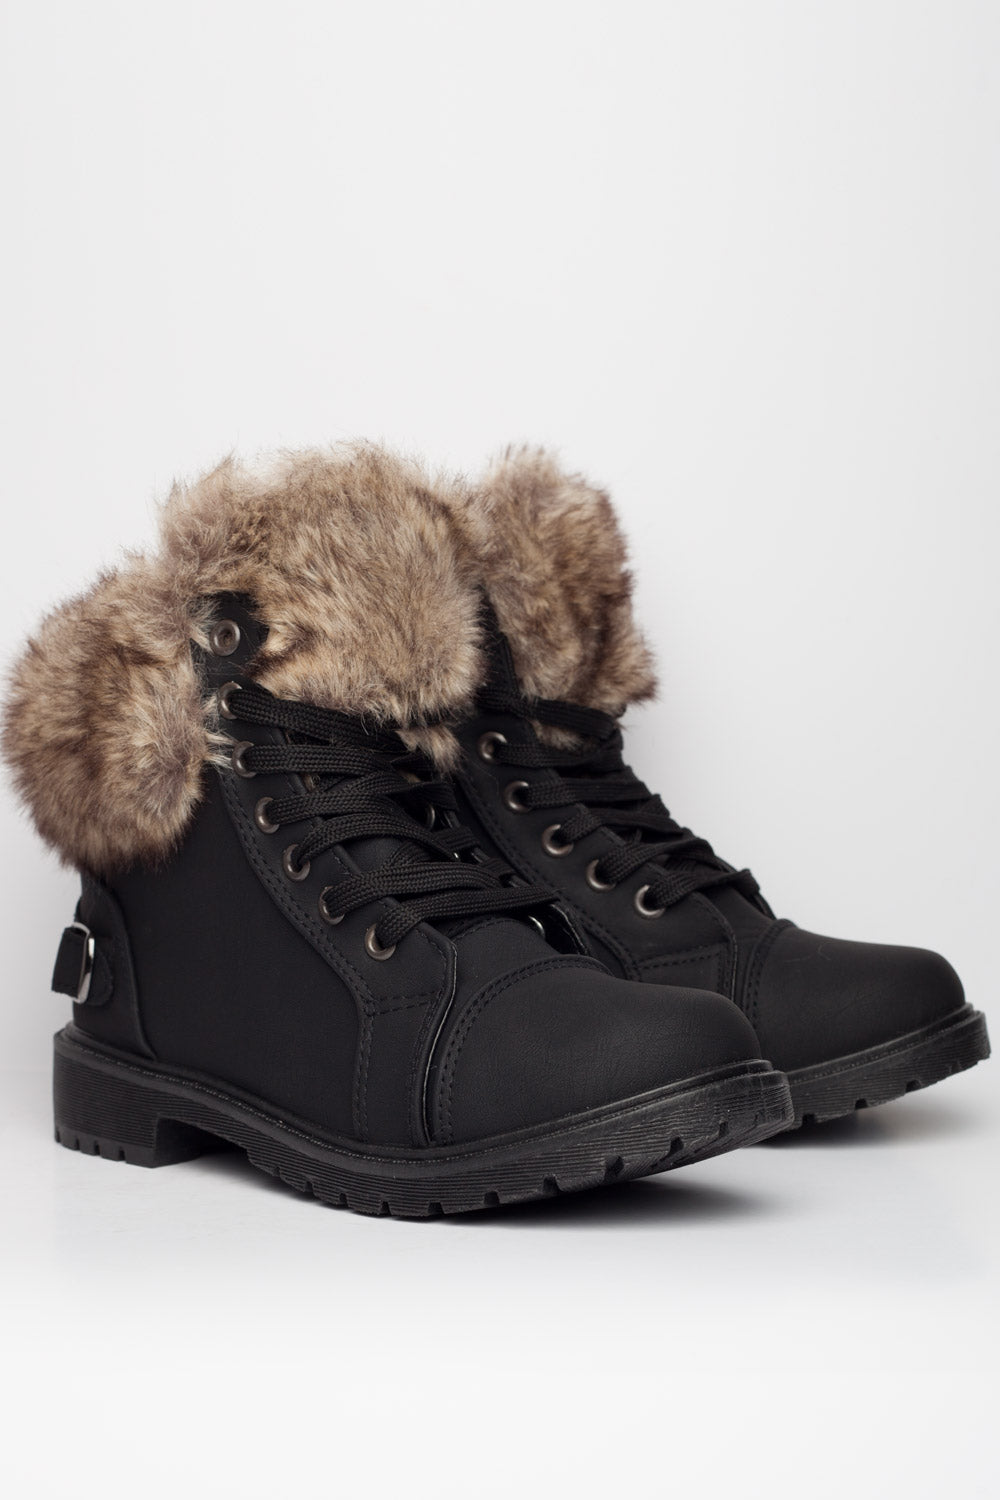 boots with fur on it